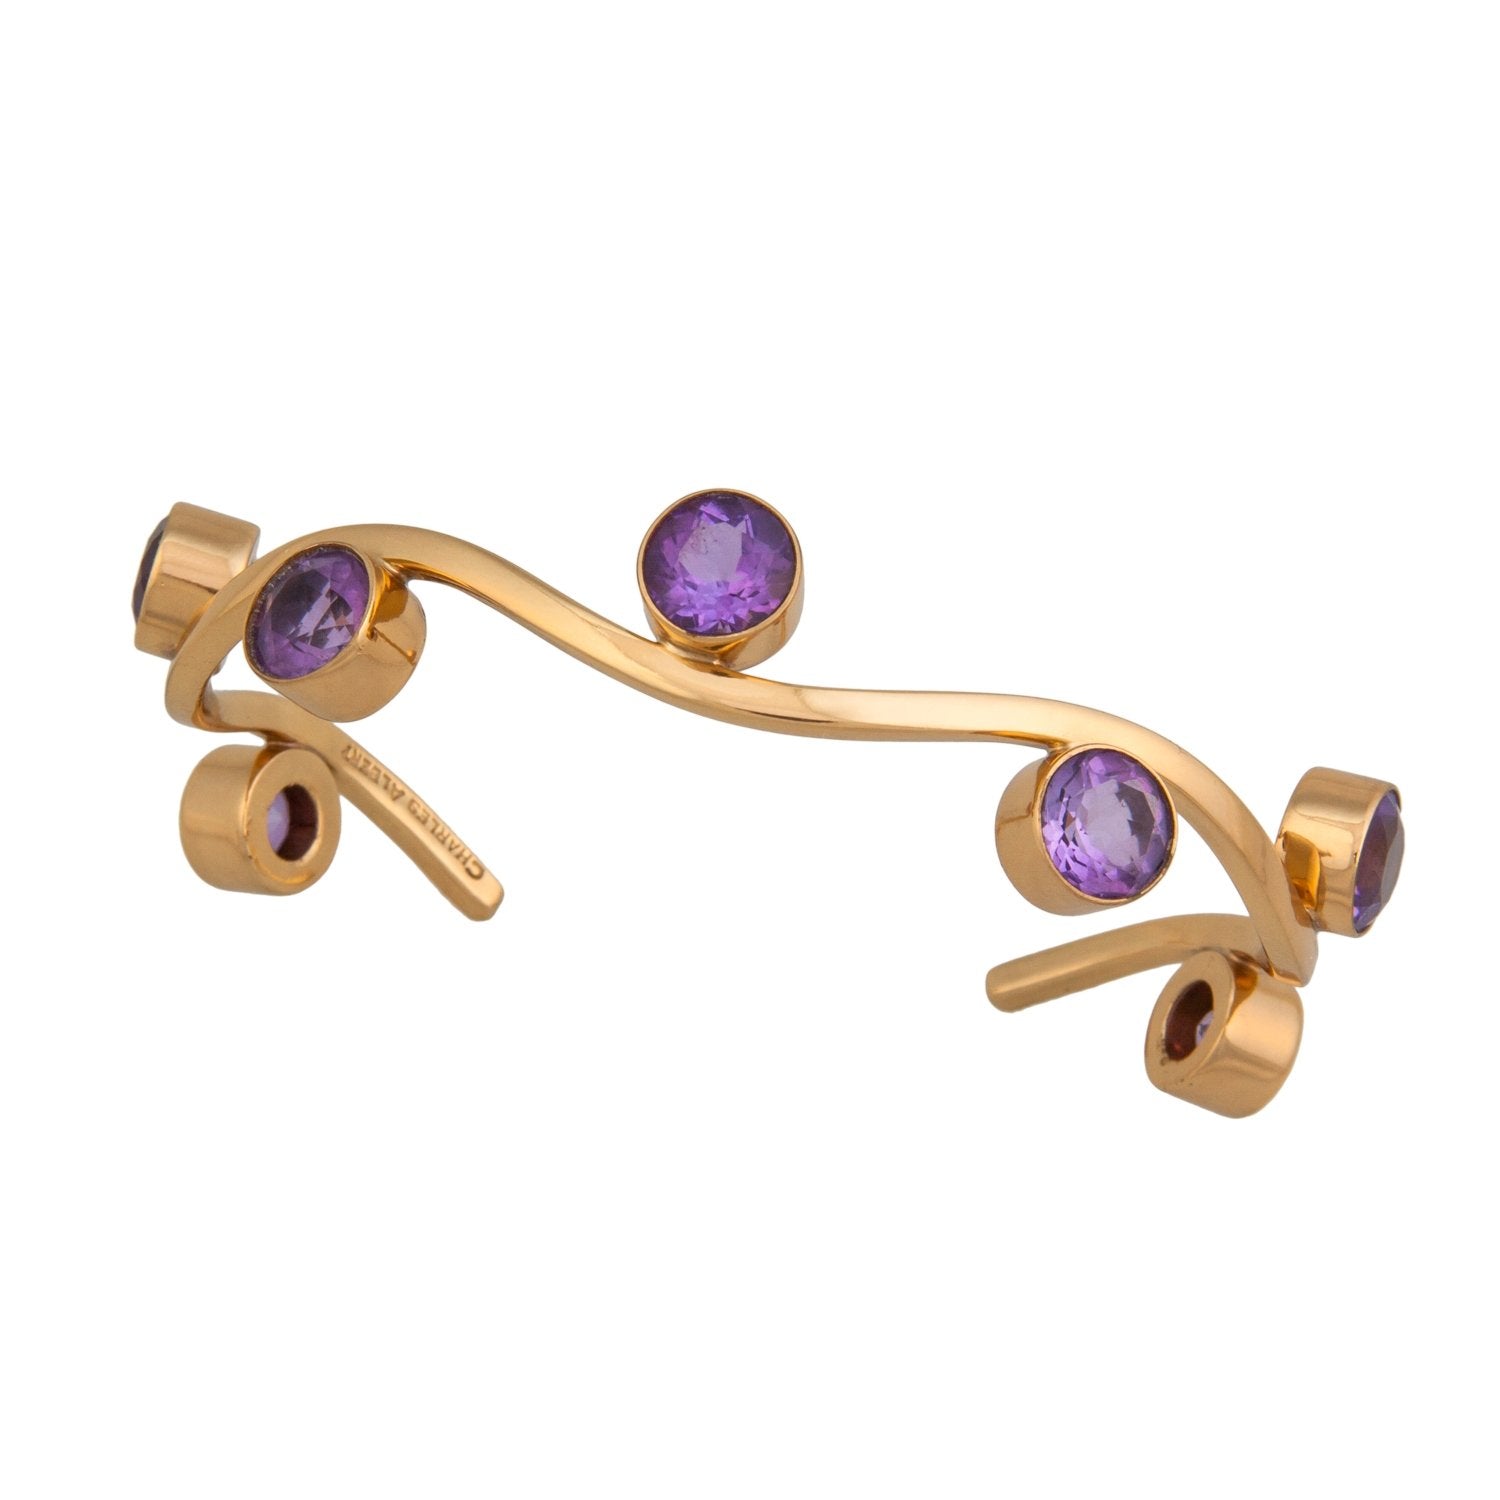 Charles Albert Jewelry - Alchemia Amethyst Wave Cuff - Front View